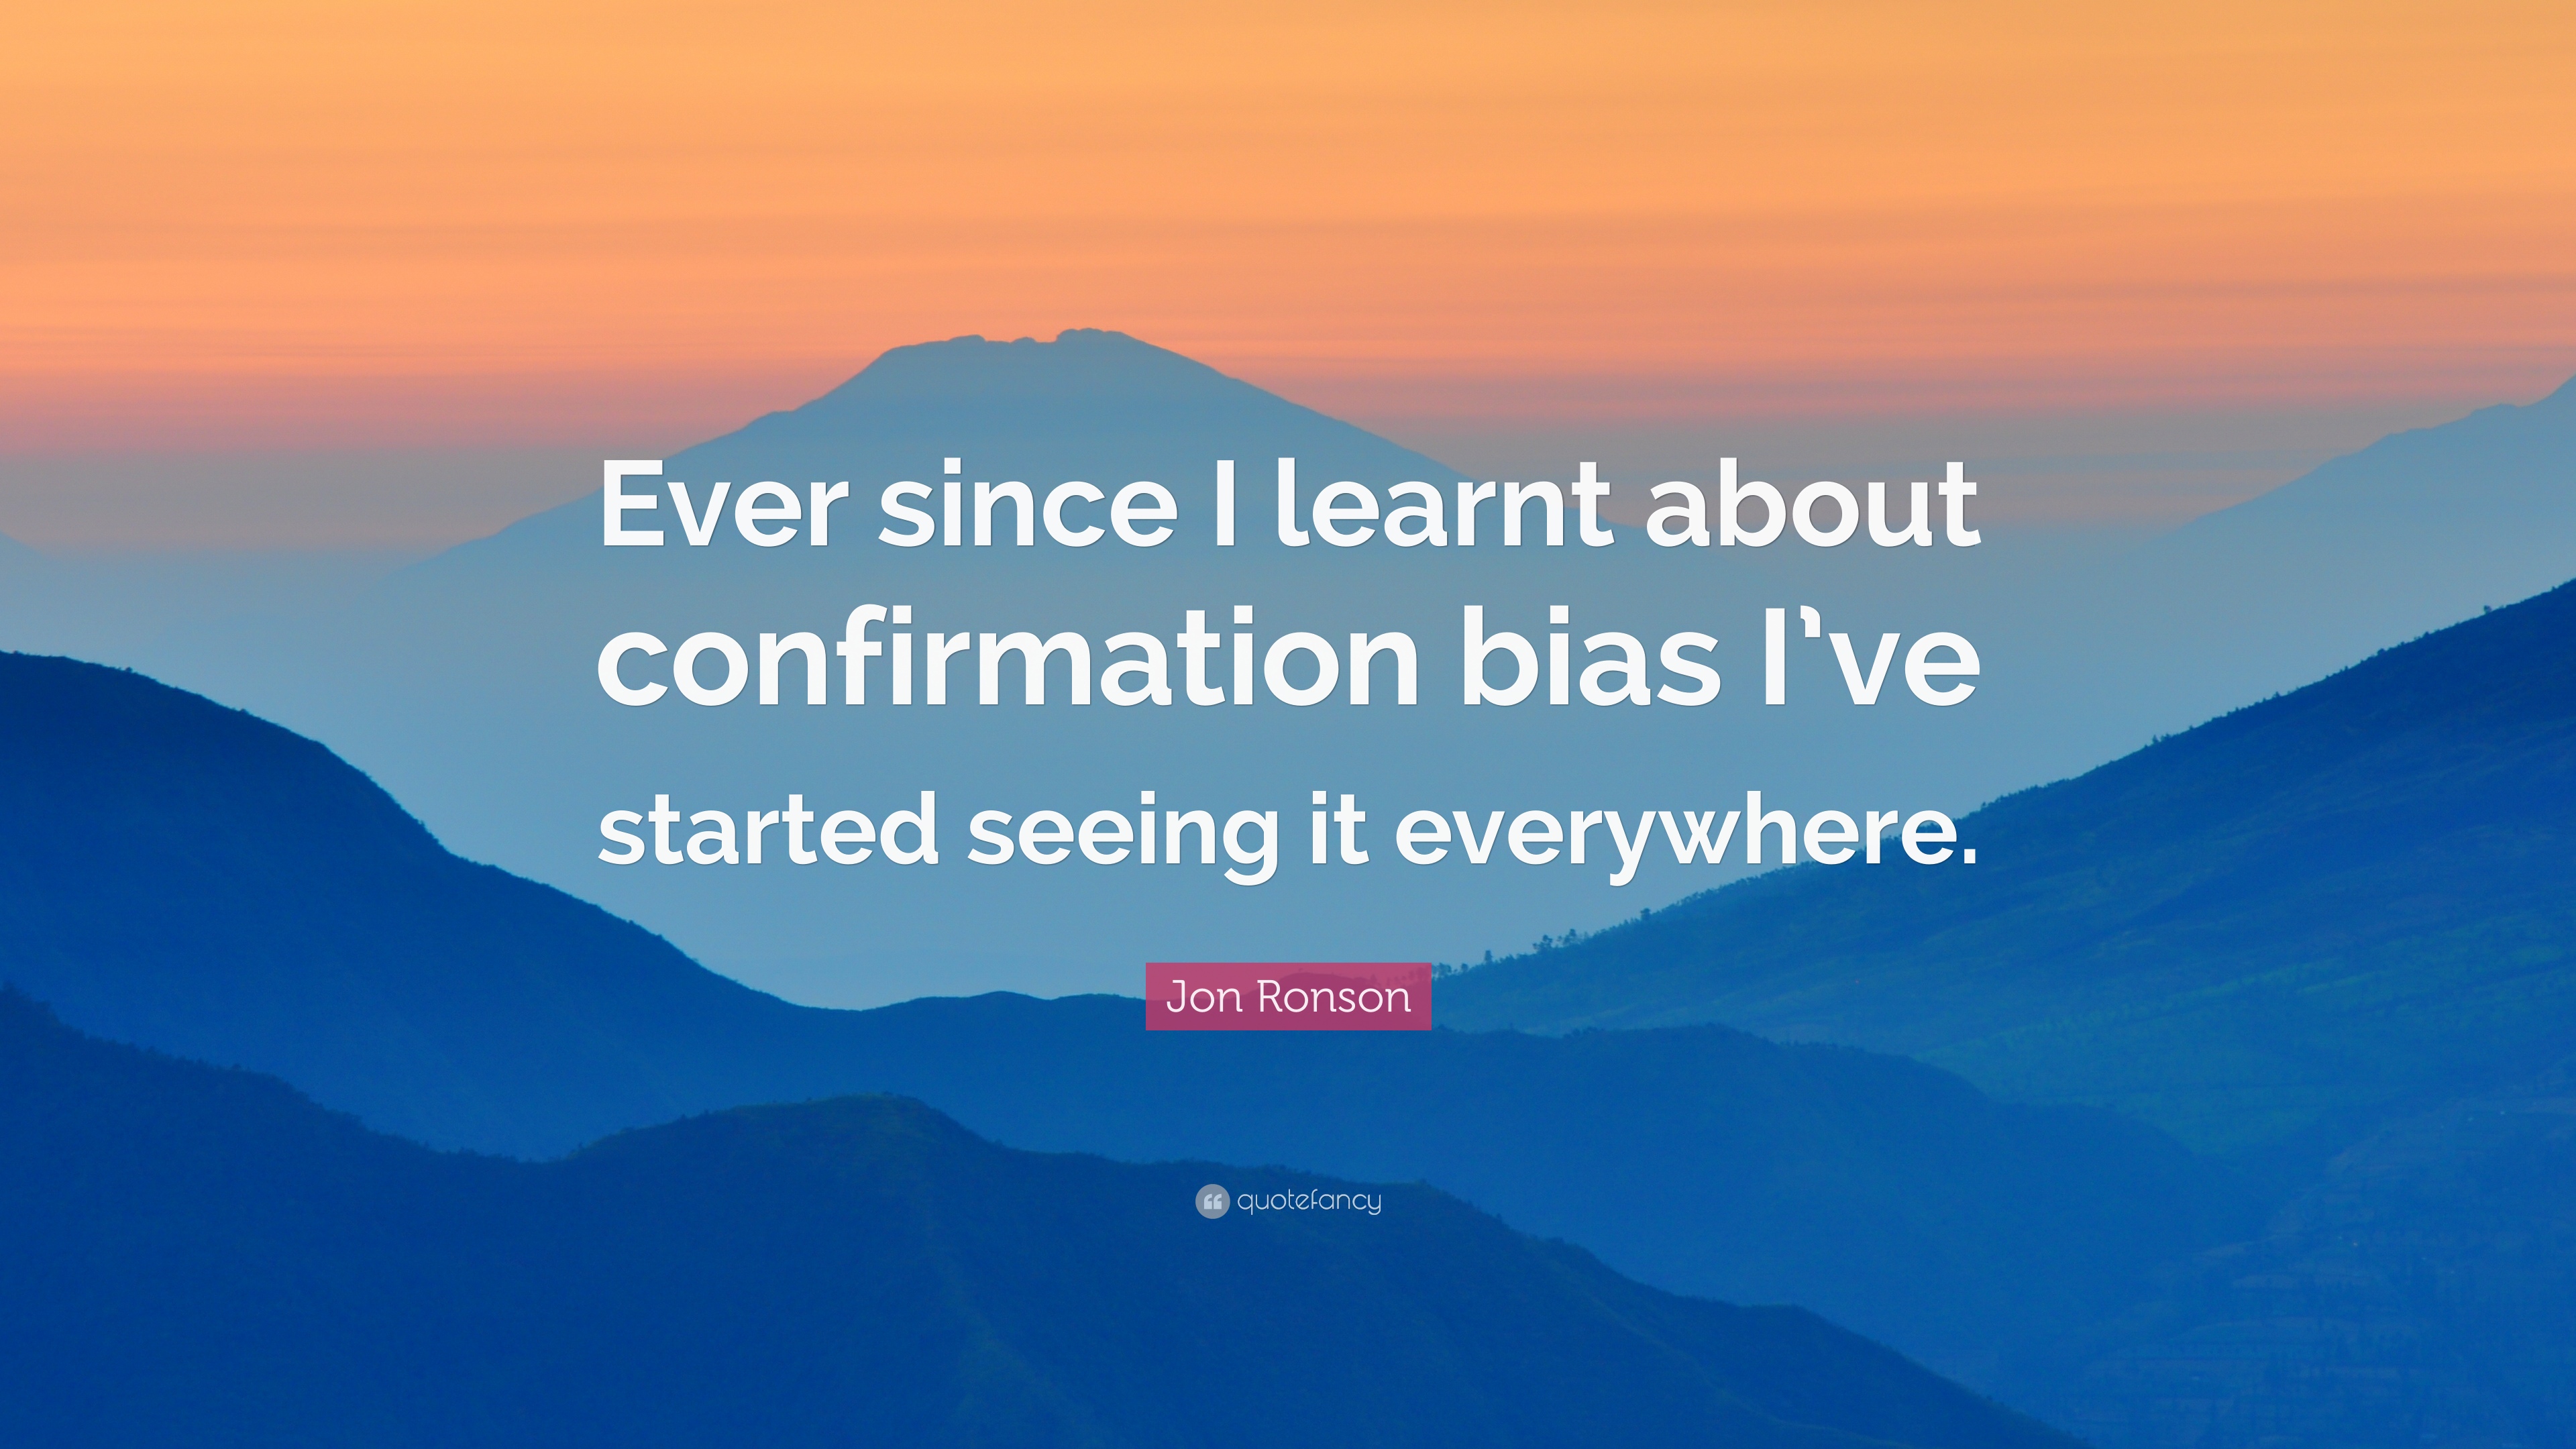 Jon Ronson Quote: “Ever since I learnt about confirmation bias I've started seeing it everywhere.”